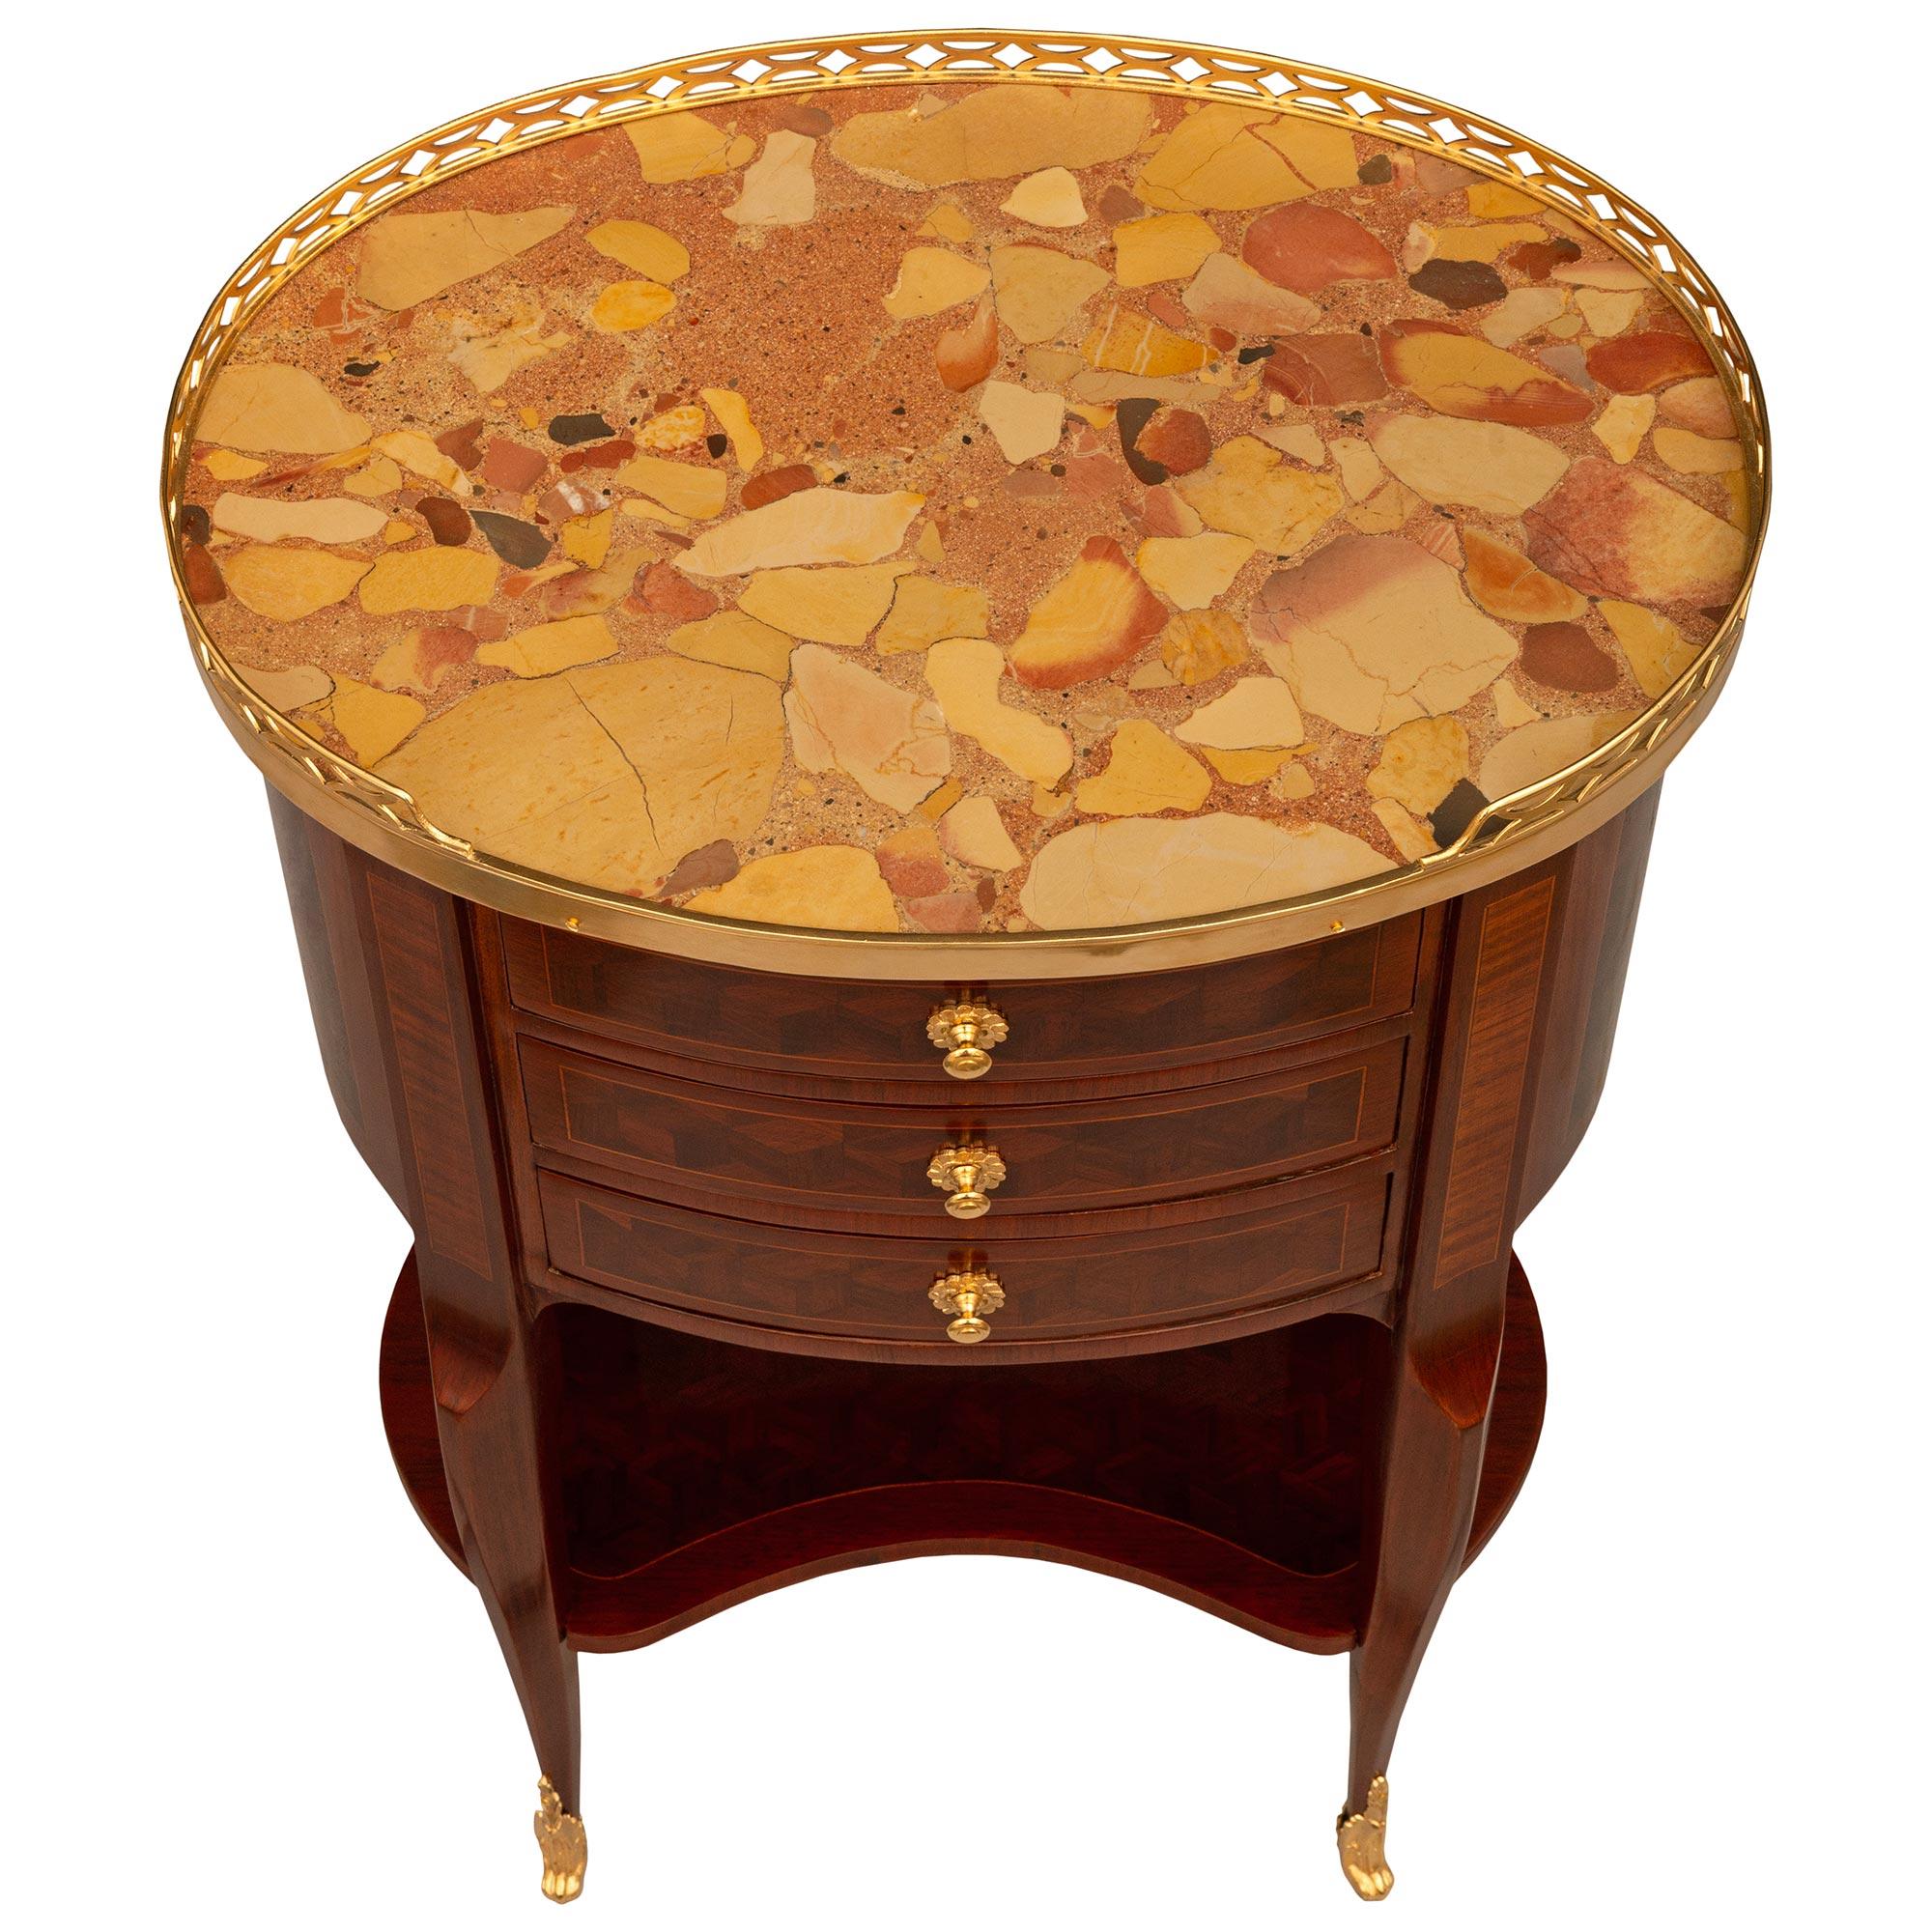 An elegant French late 19th century Transitional st. Tulipwood, Ormolu and Brèche d'Alep marble side table. This beautifully designed three drawer side table is raised on four tapered cabriole legs with wrap around Ormolu sabots with richly chased